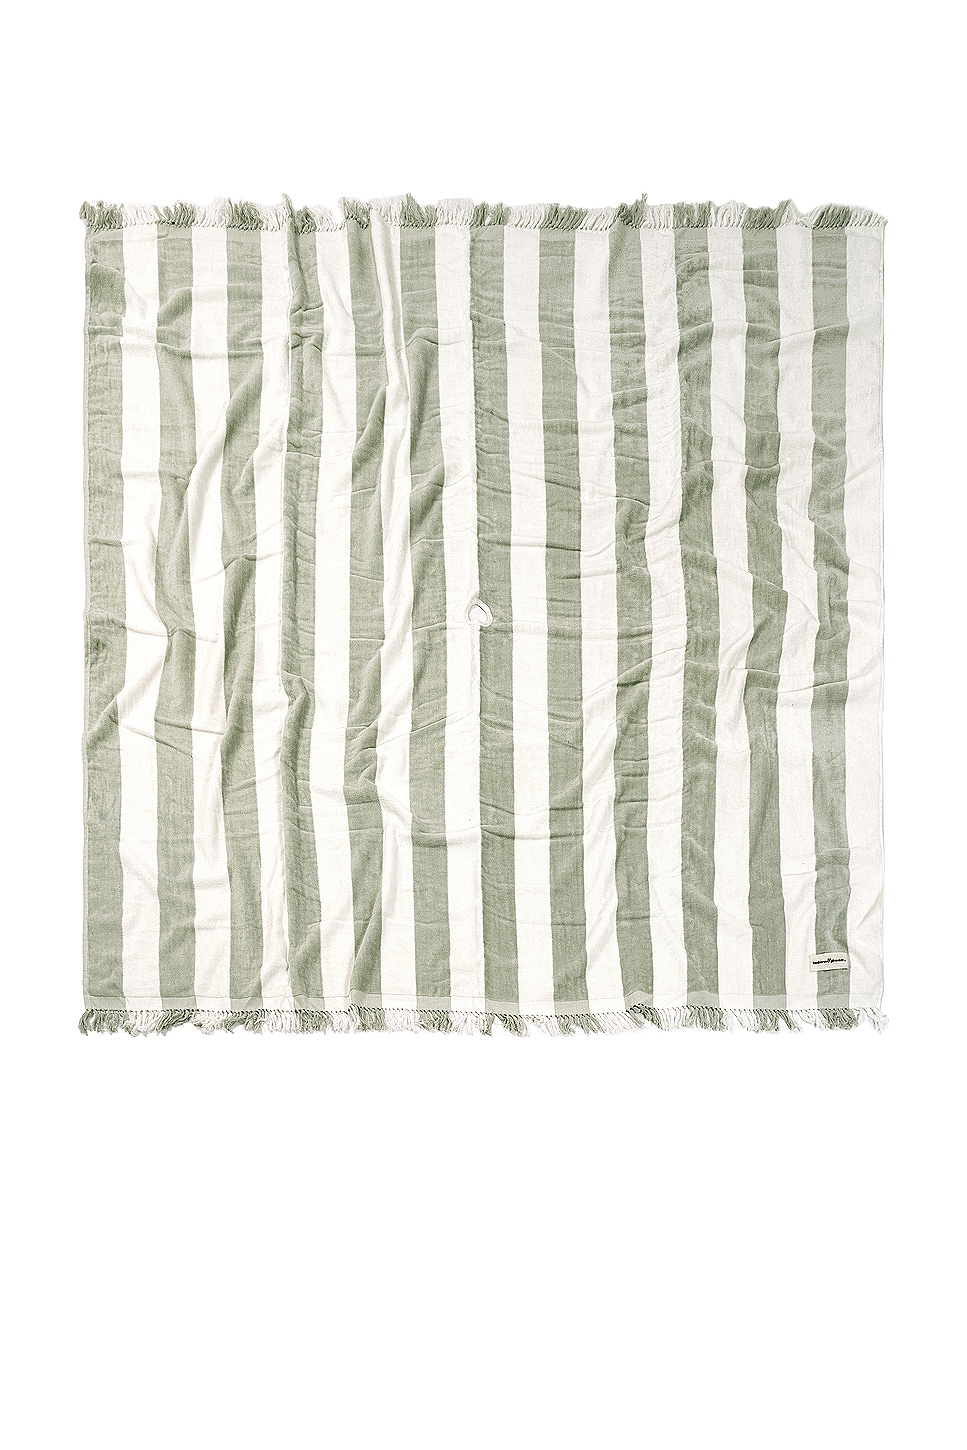 Image 1 of business & pleasure co. Holiday Blanket in Crew Sage Stripe